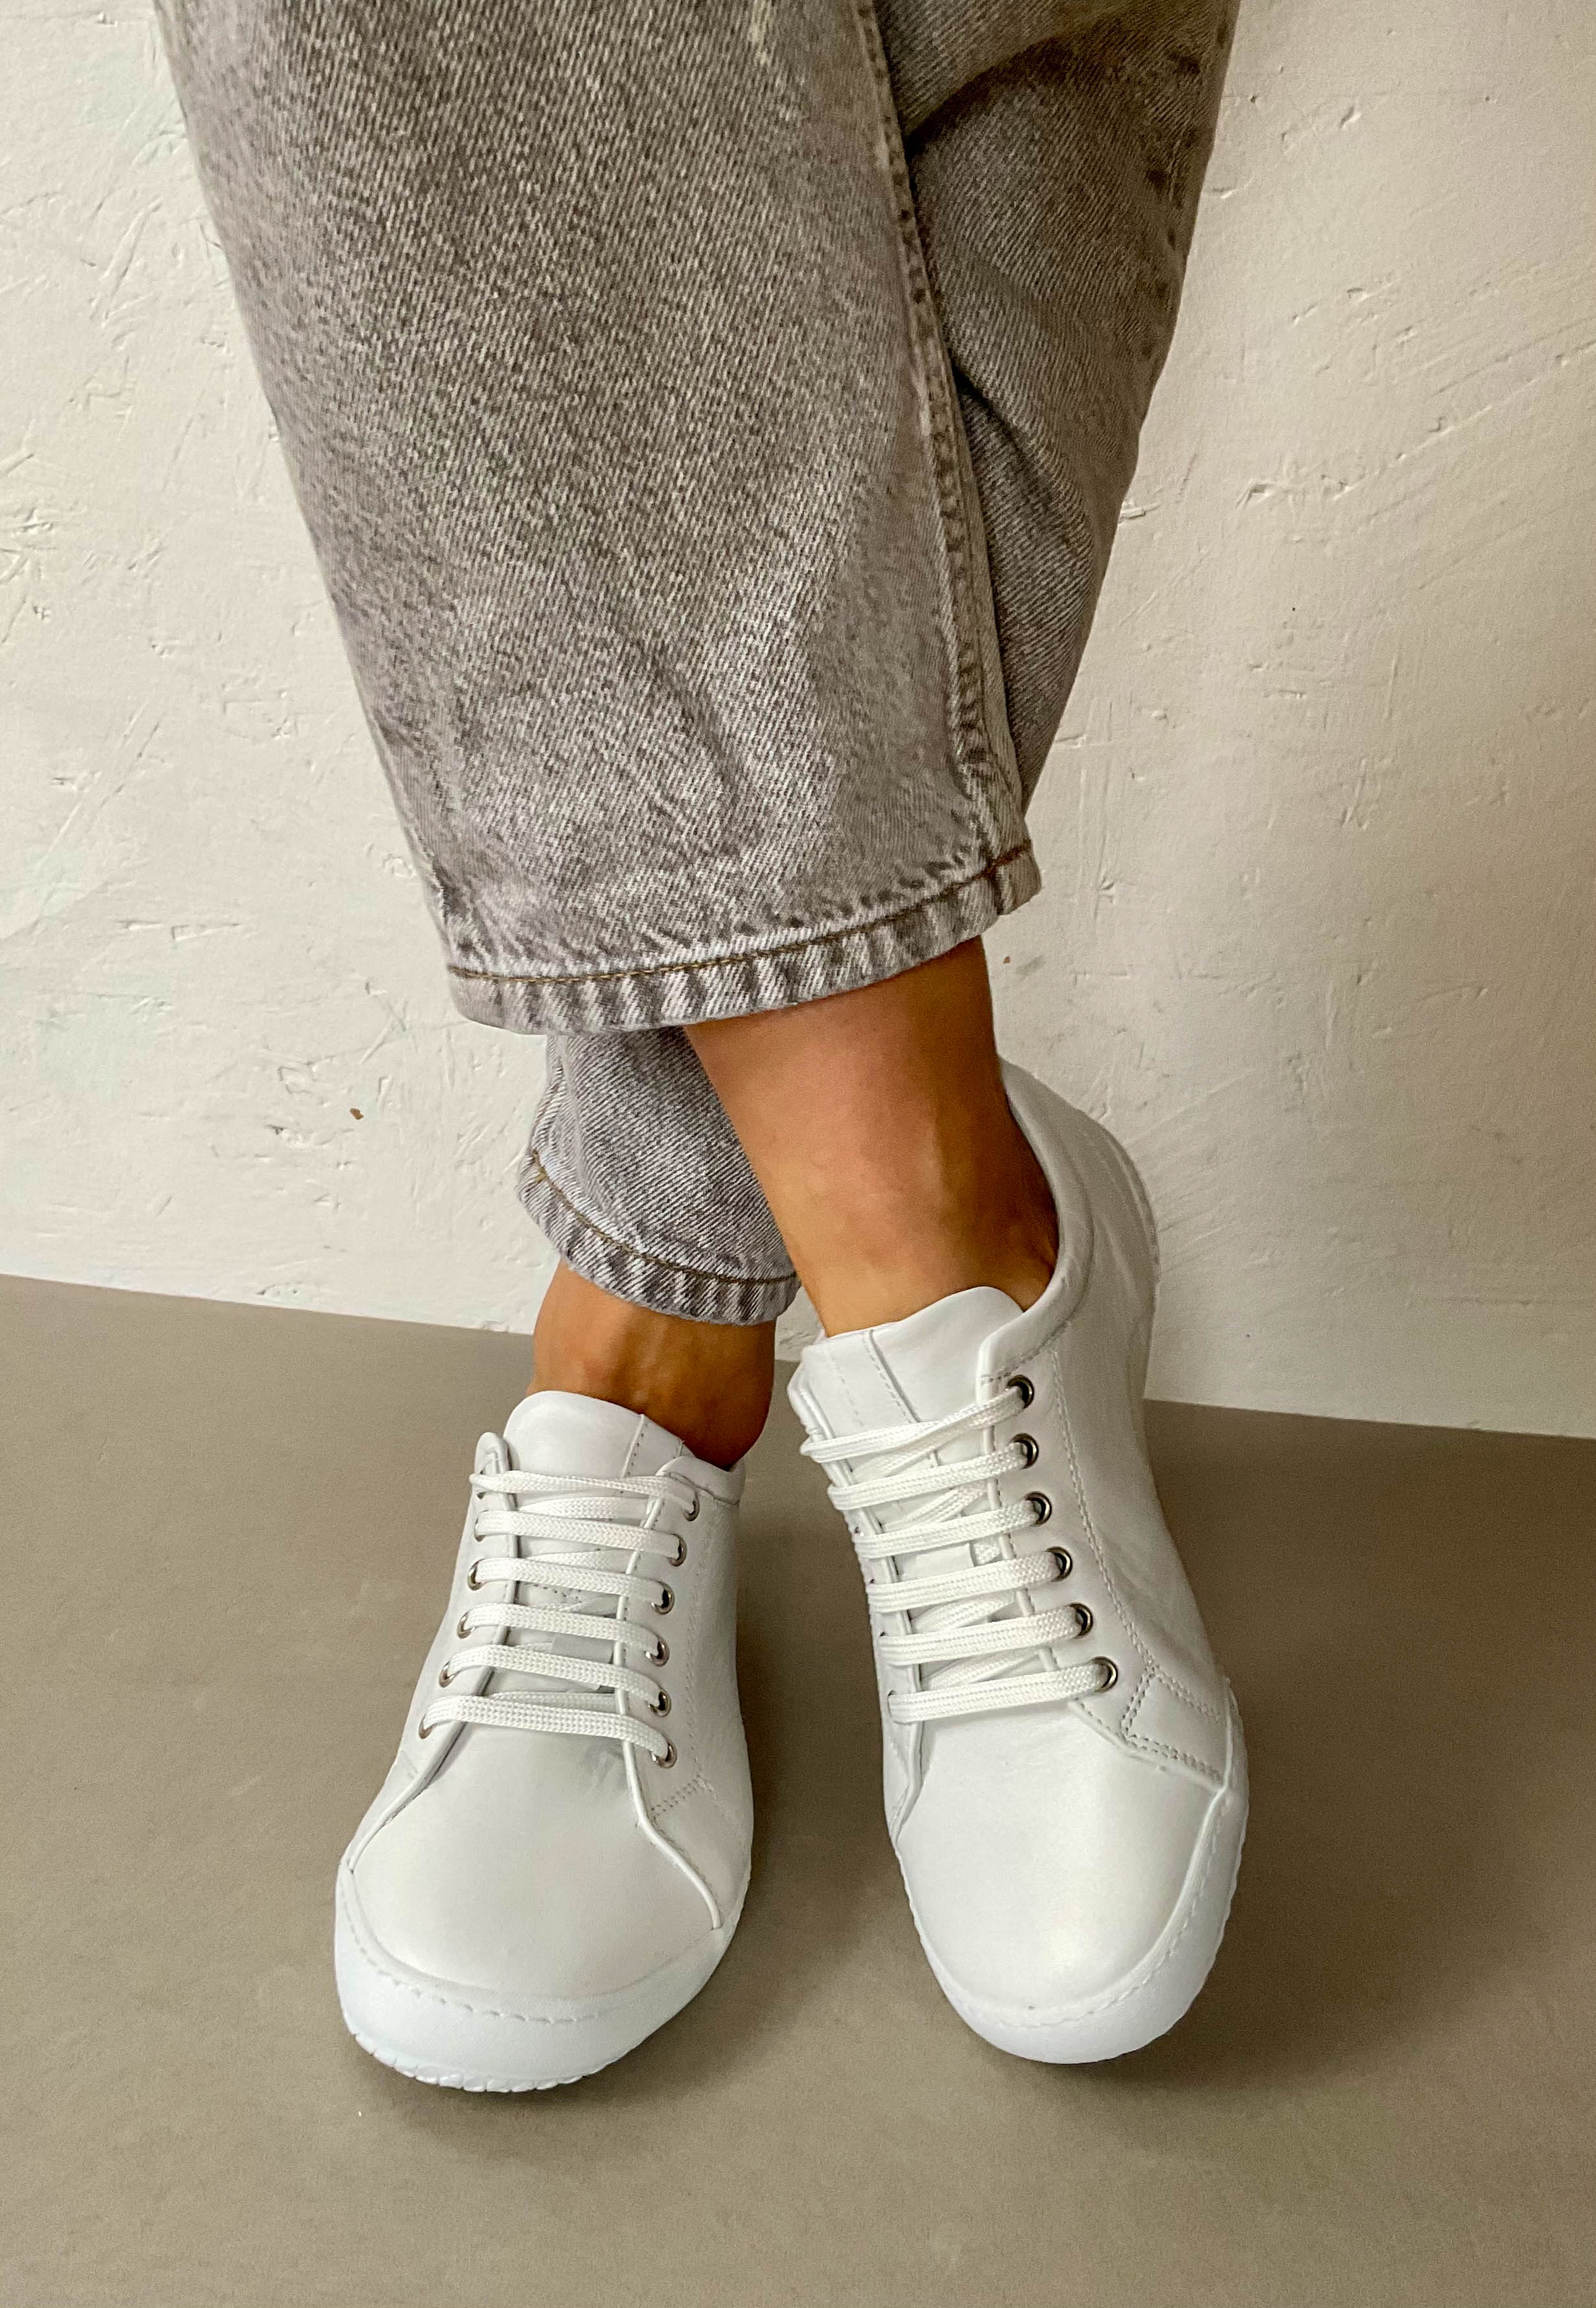 white shoes to go with jeans